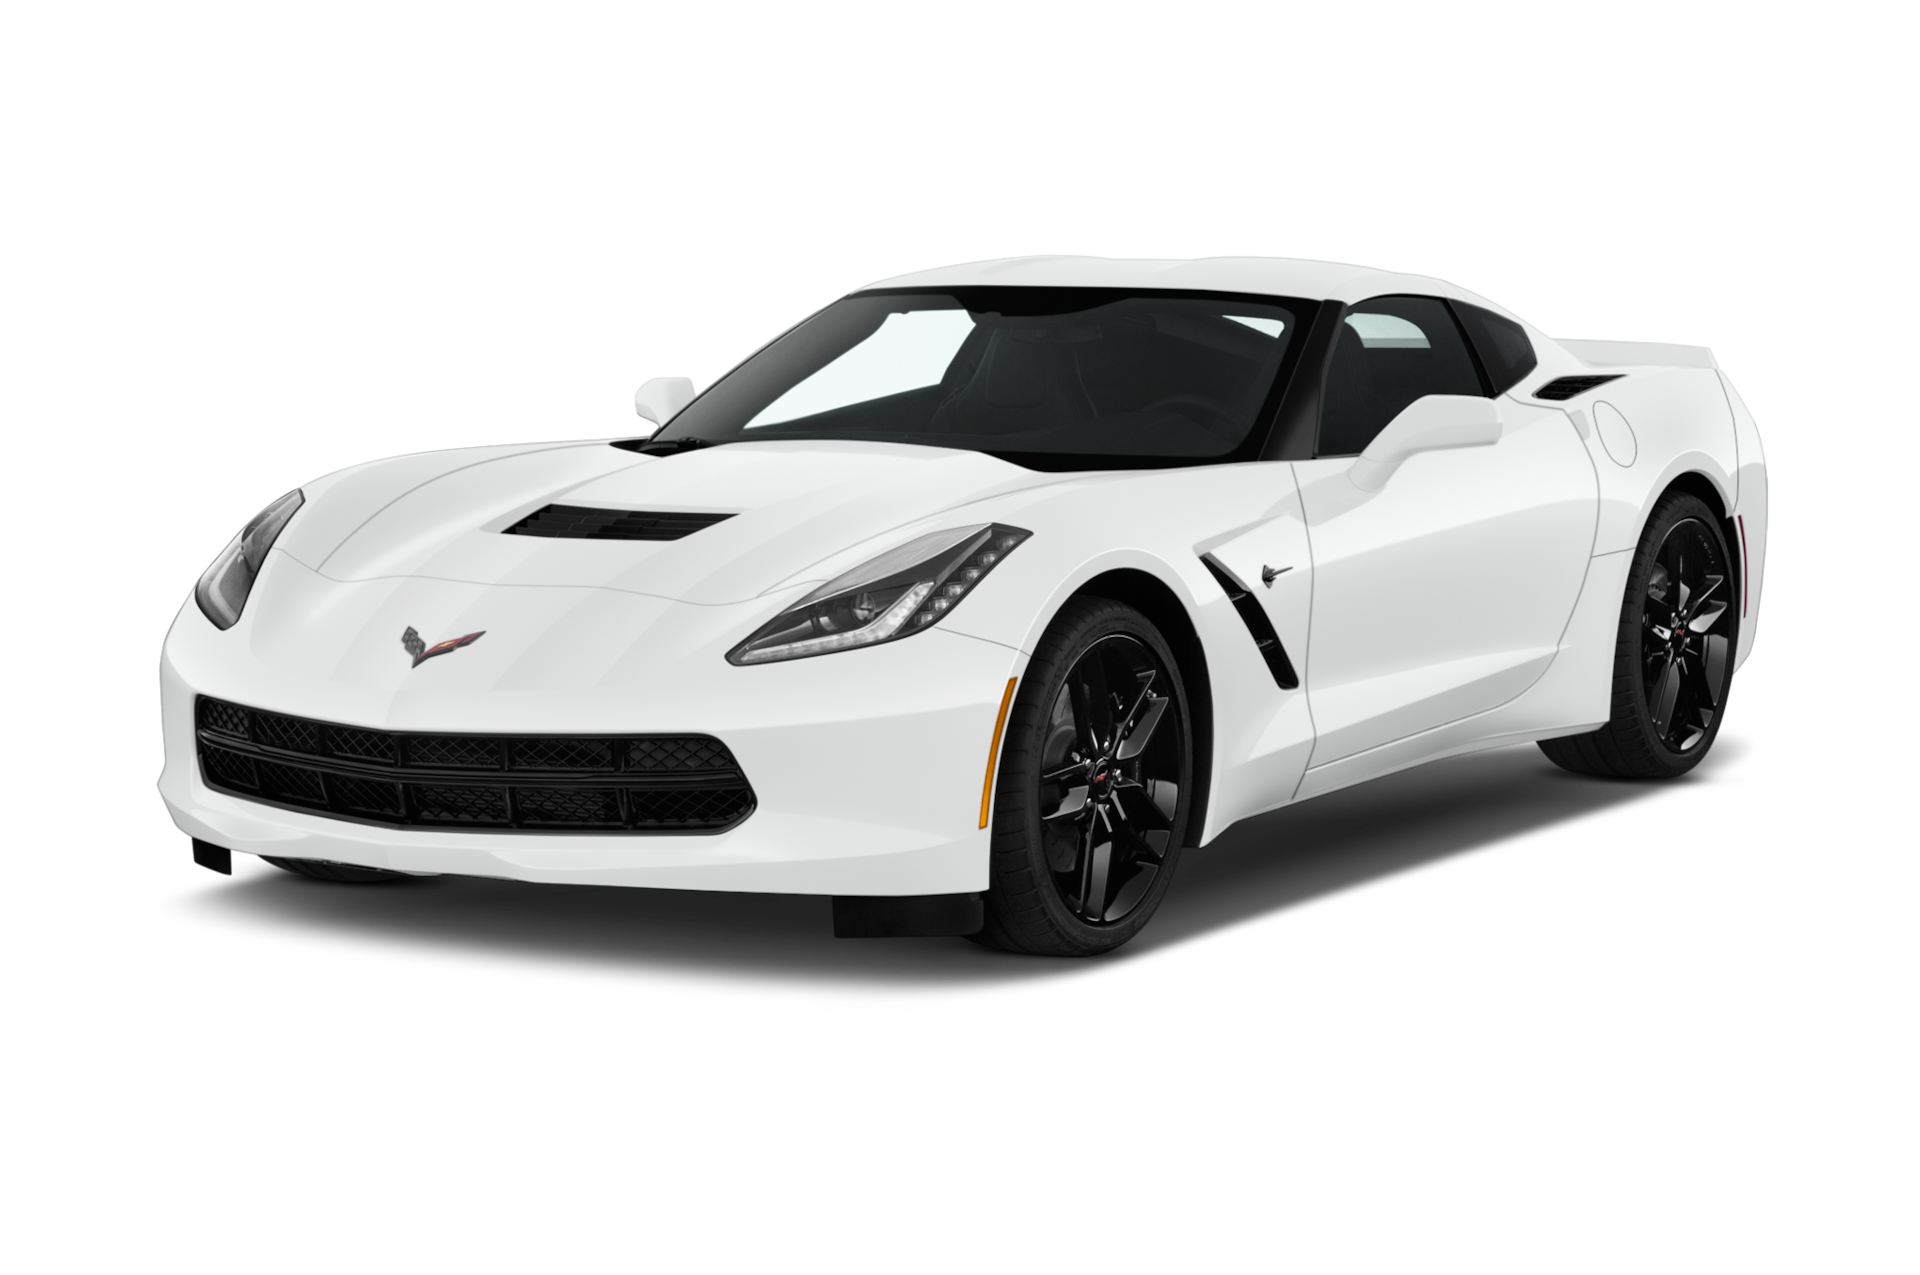 2019 Chevrolet Corvette Prices, Reviews, and Photos - MotorTrend